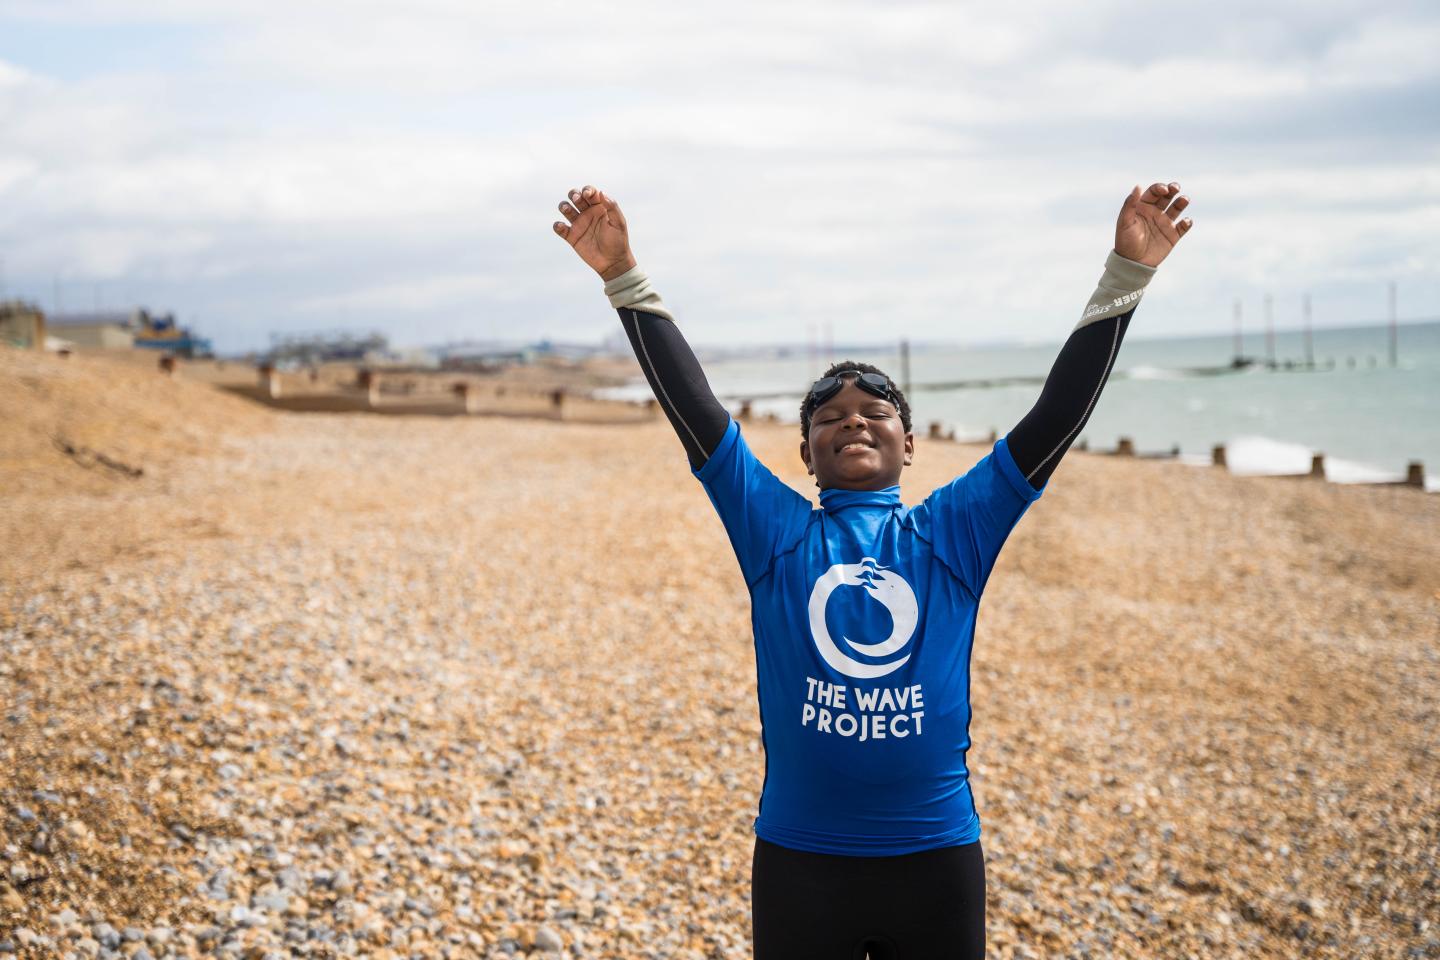 A young person with arms in the air, wearing a wetsuit and t-shirt, standing on a beach.